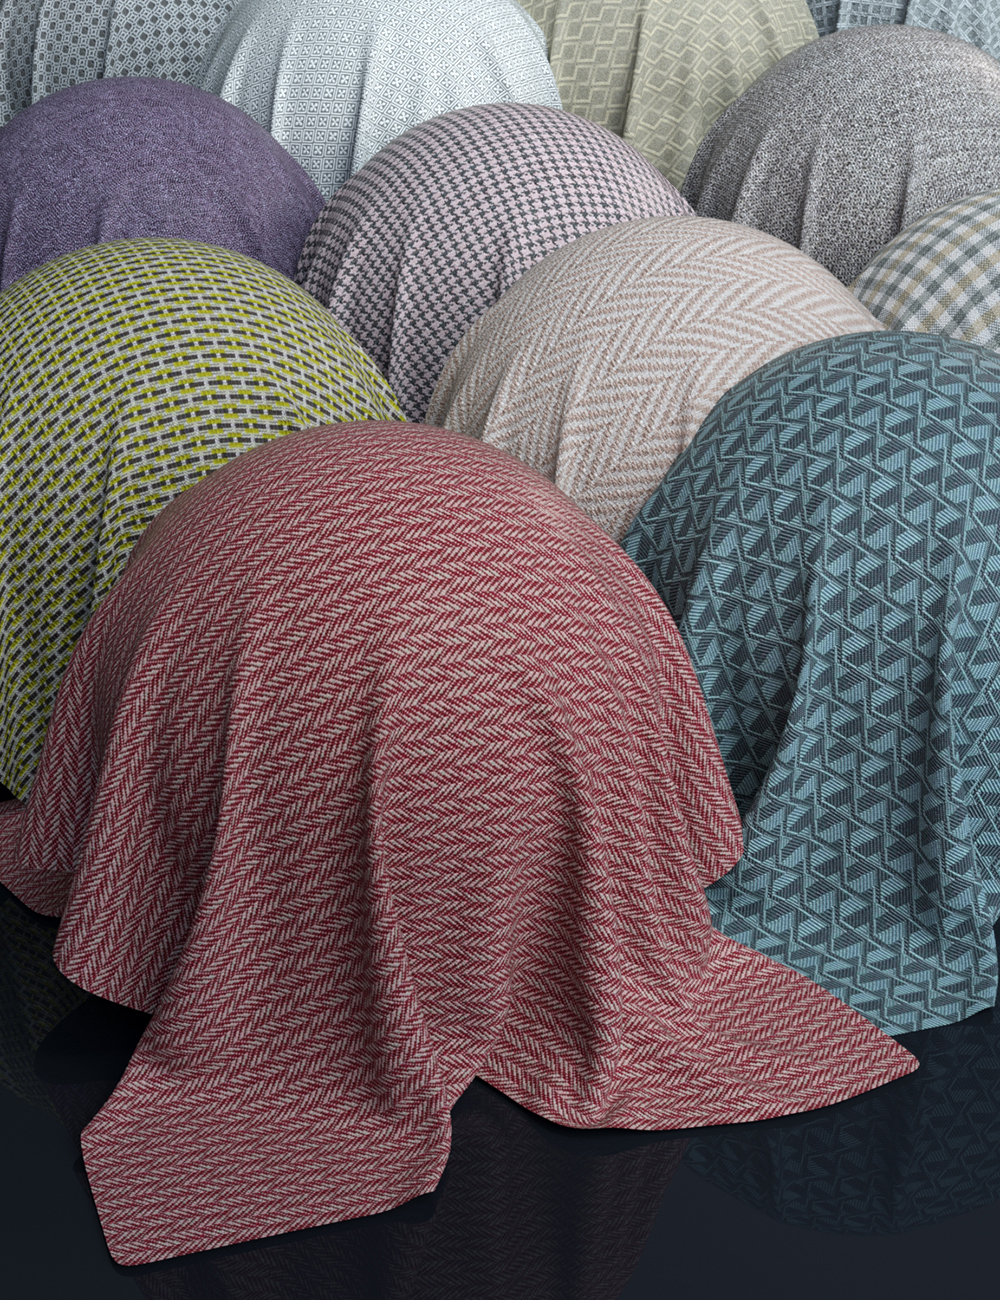 Upholstery Shaders by: Atenais, 3D Models by Daz 3D